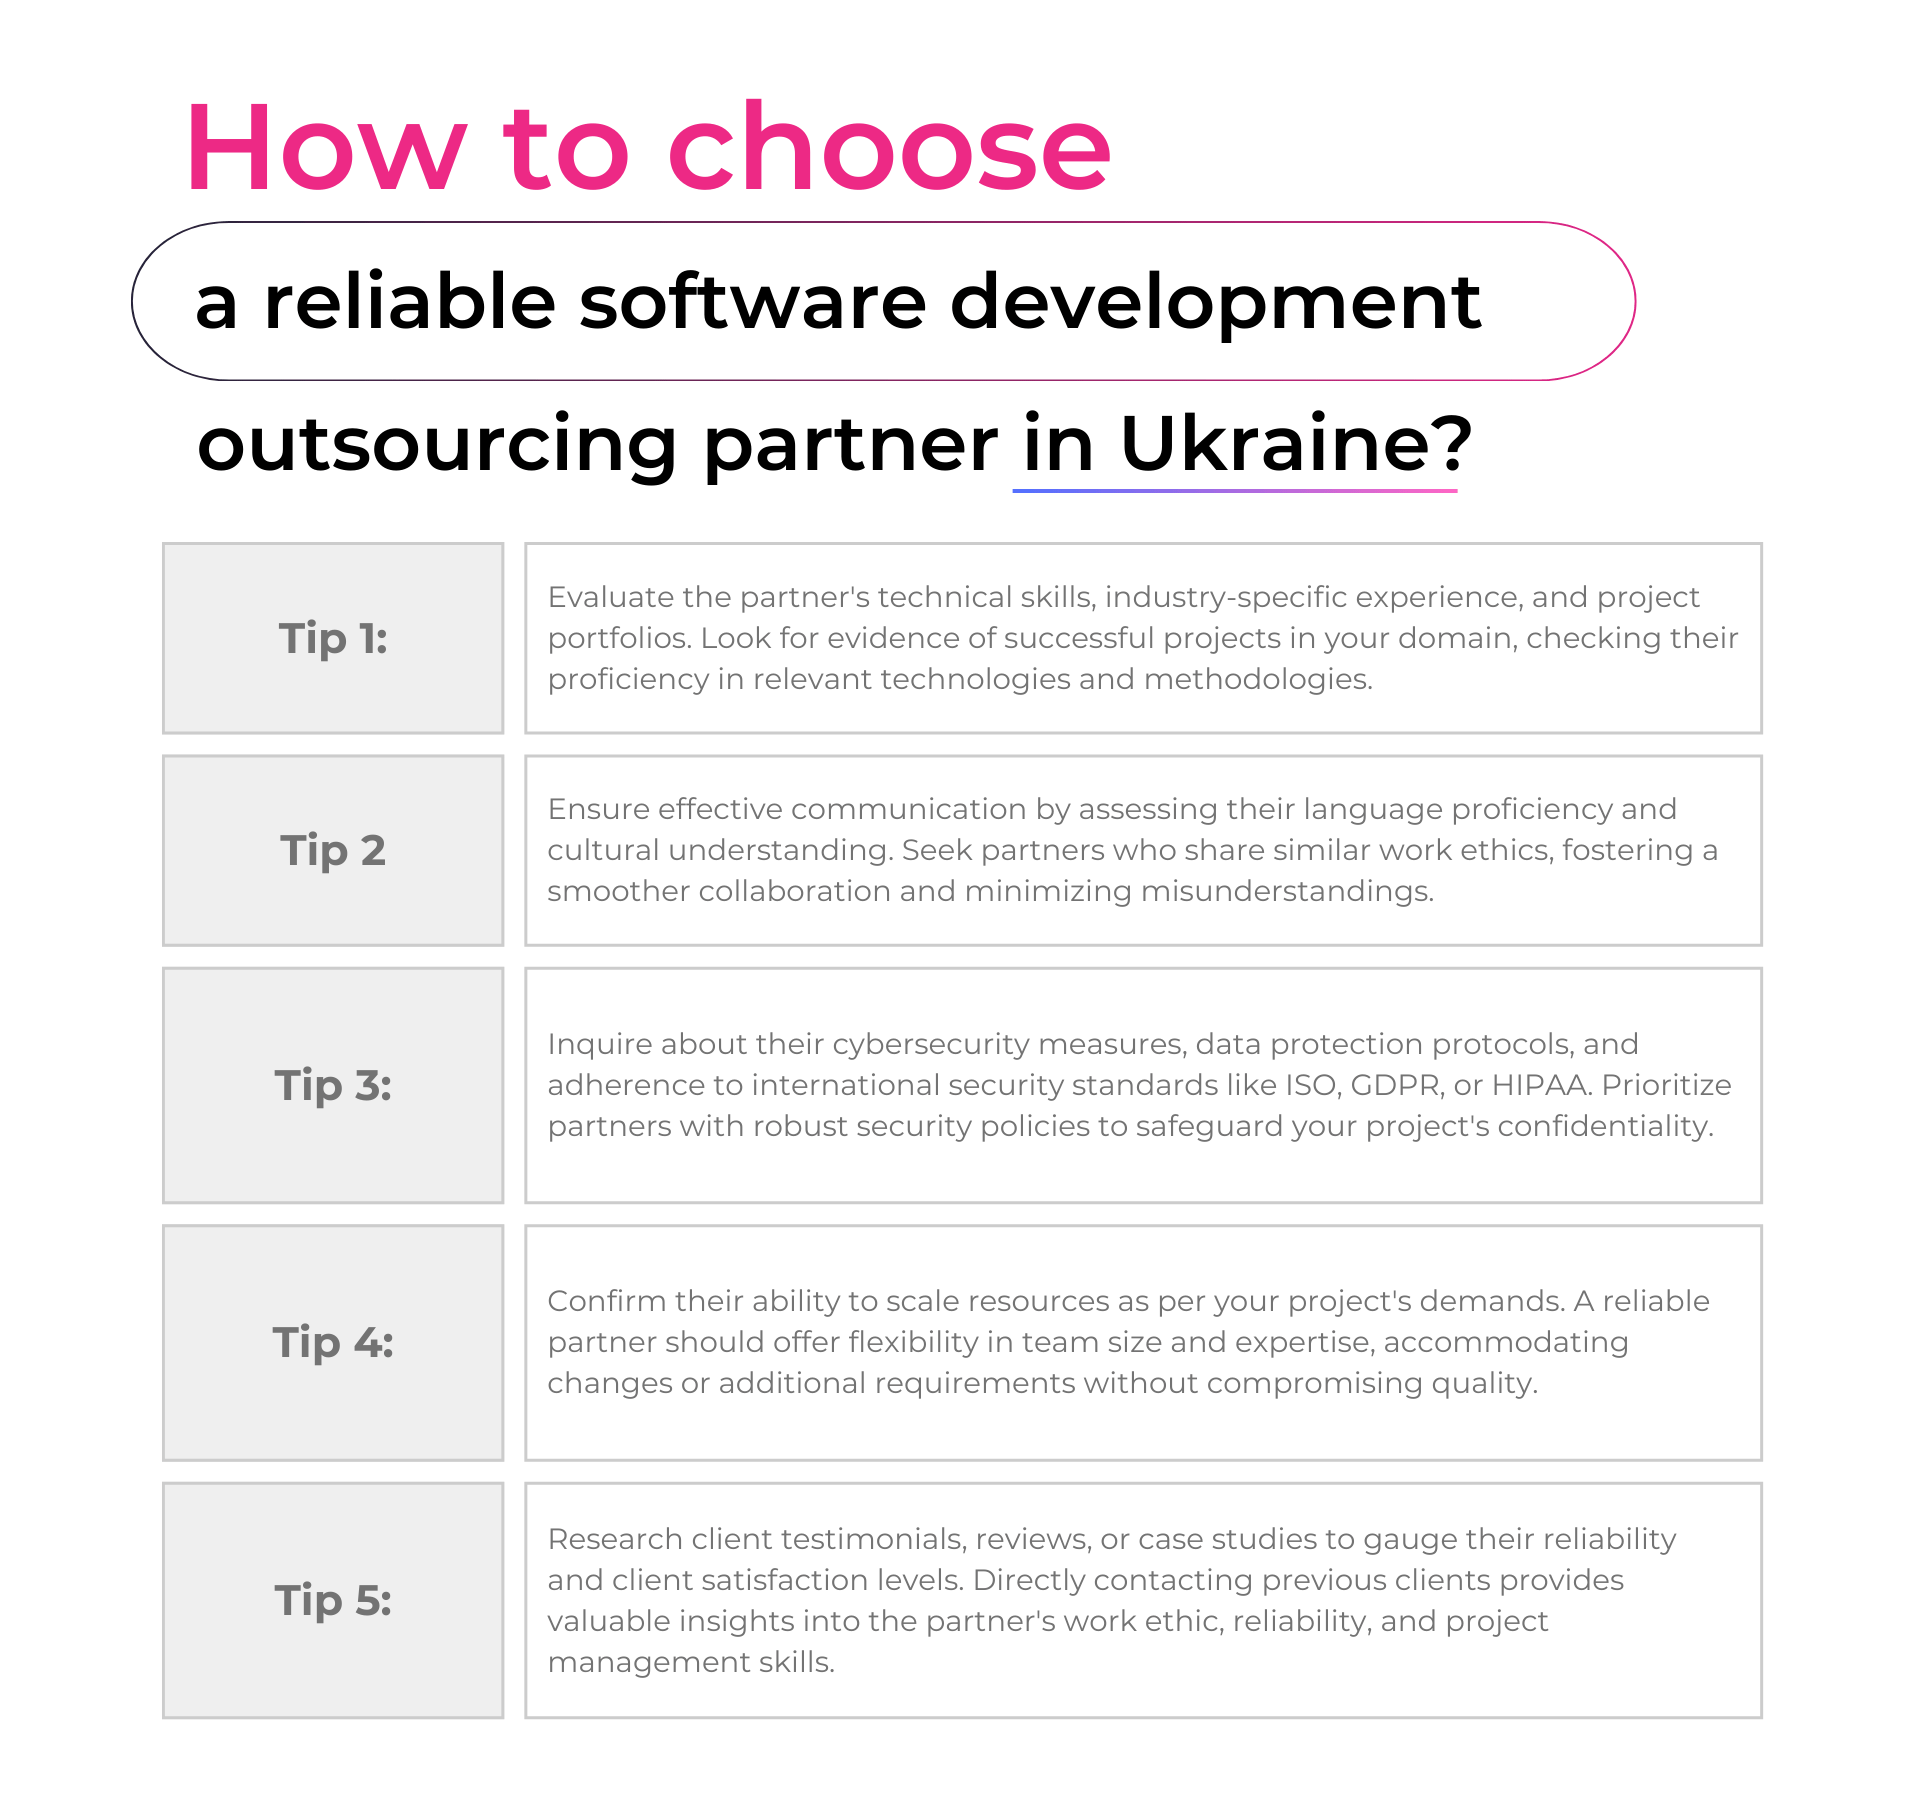 How to choose a reliable software development outsourcing partner in Ukraine